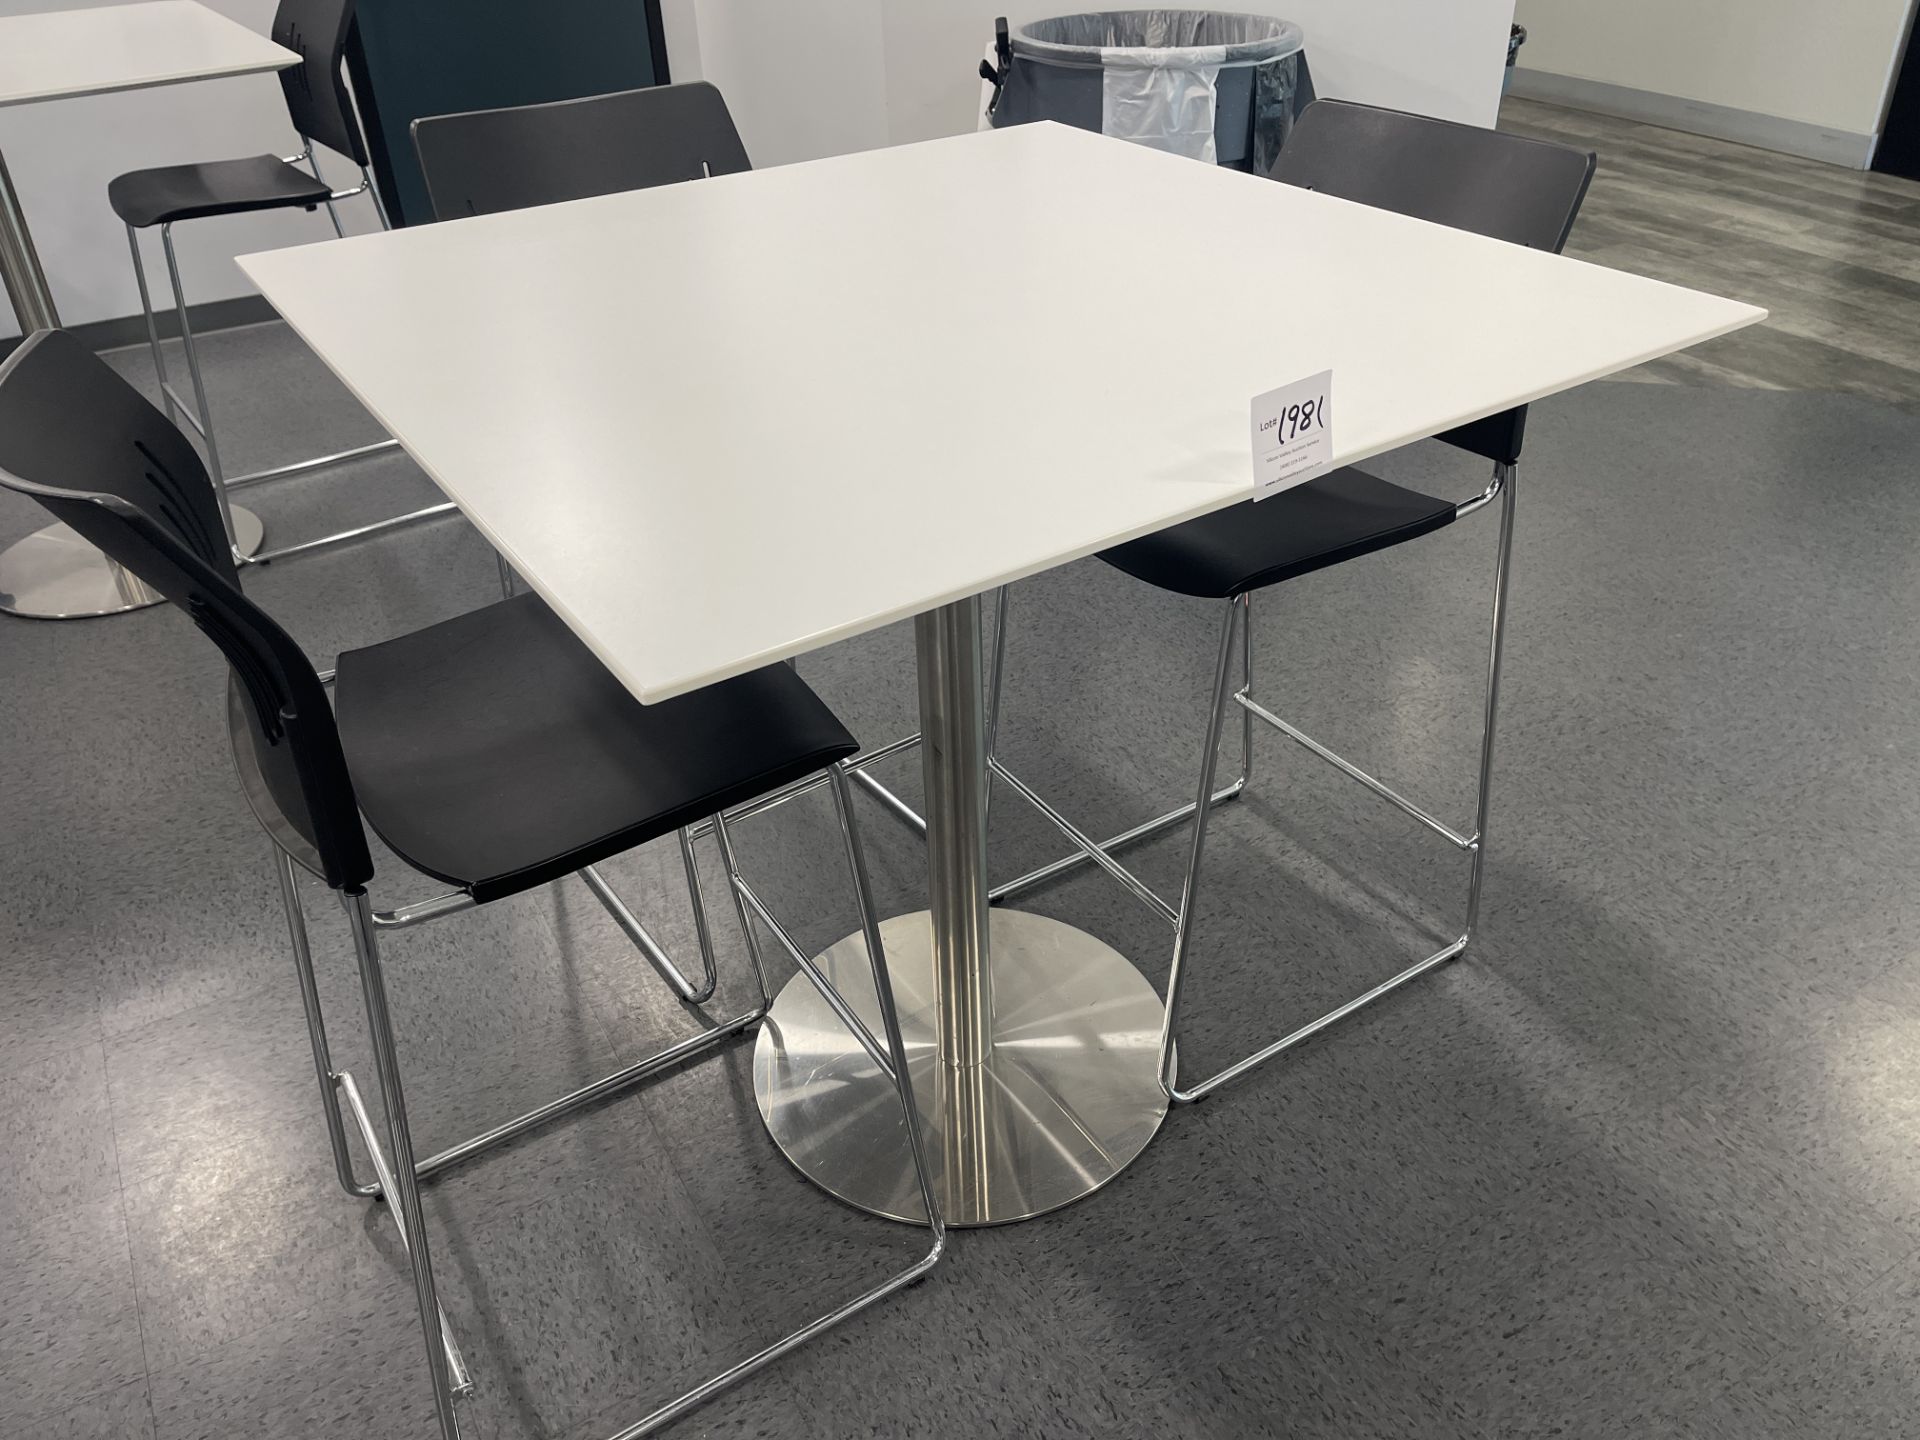 White Square Table with metal base 42" wide x 42" deep x 42" high and three black chairs